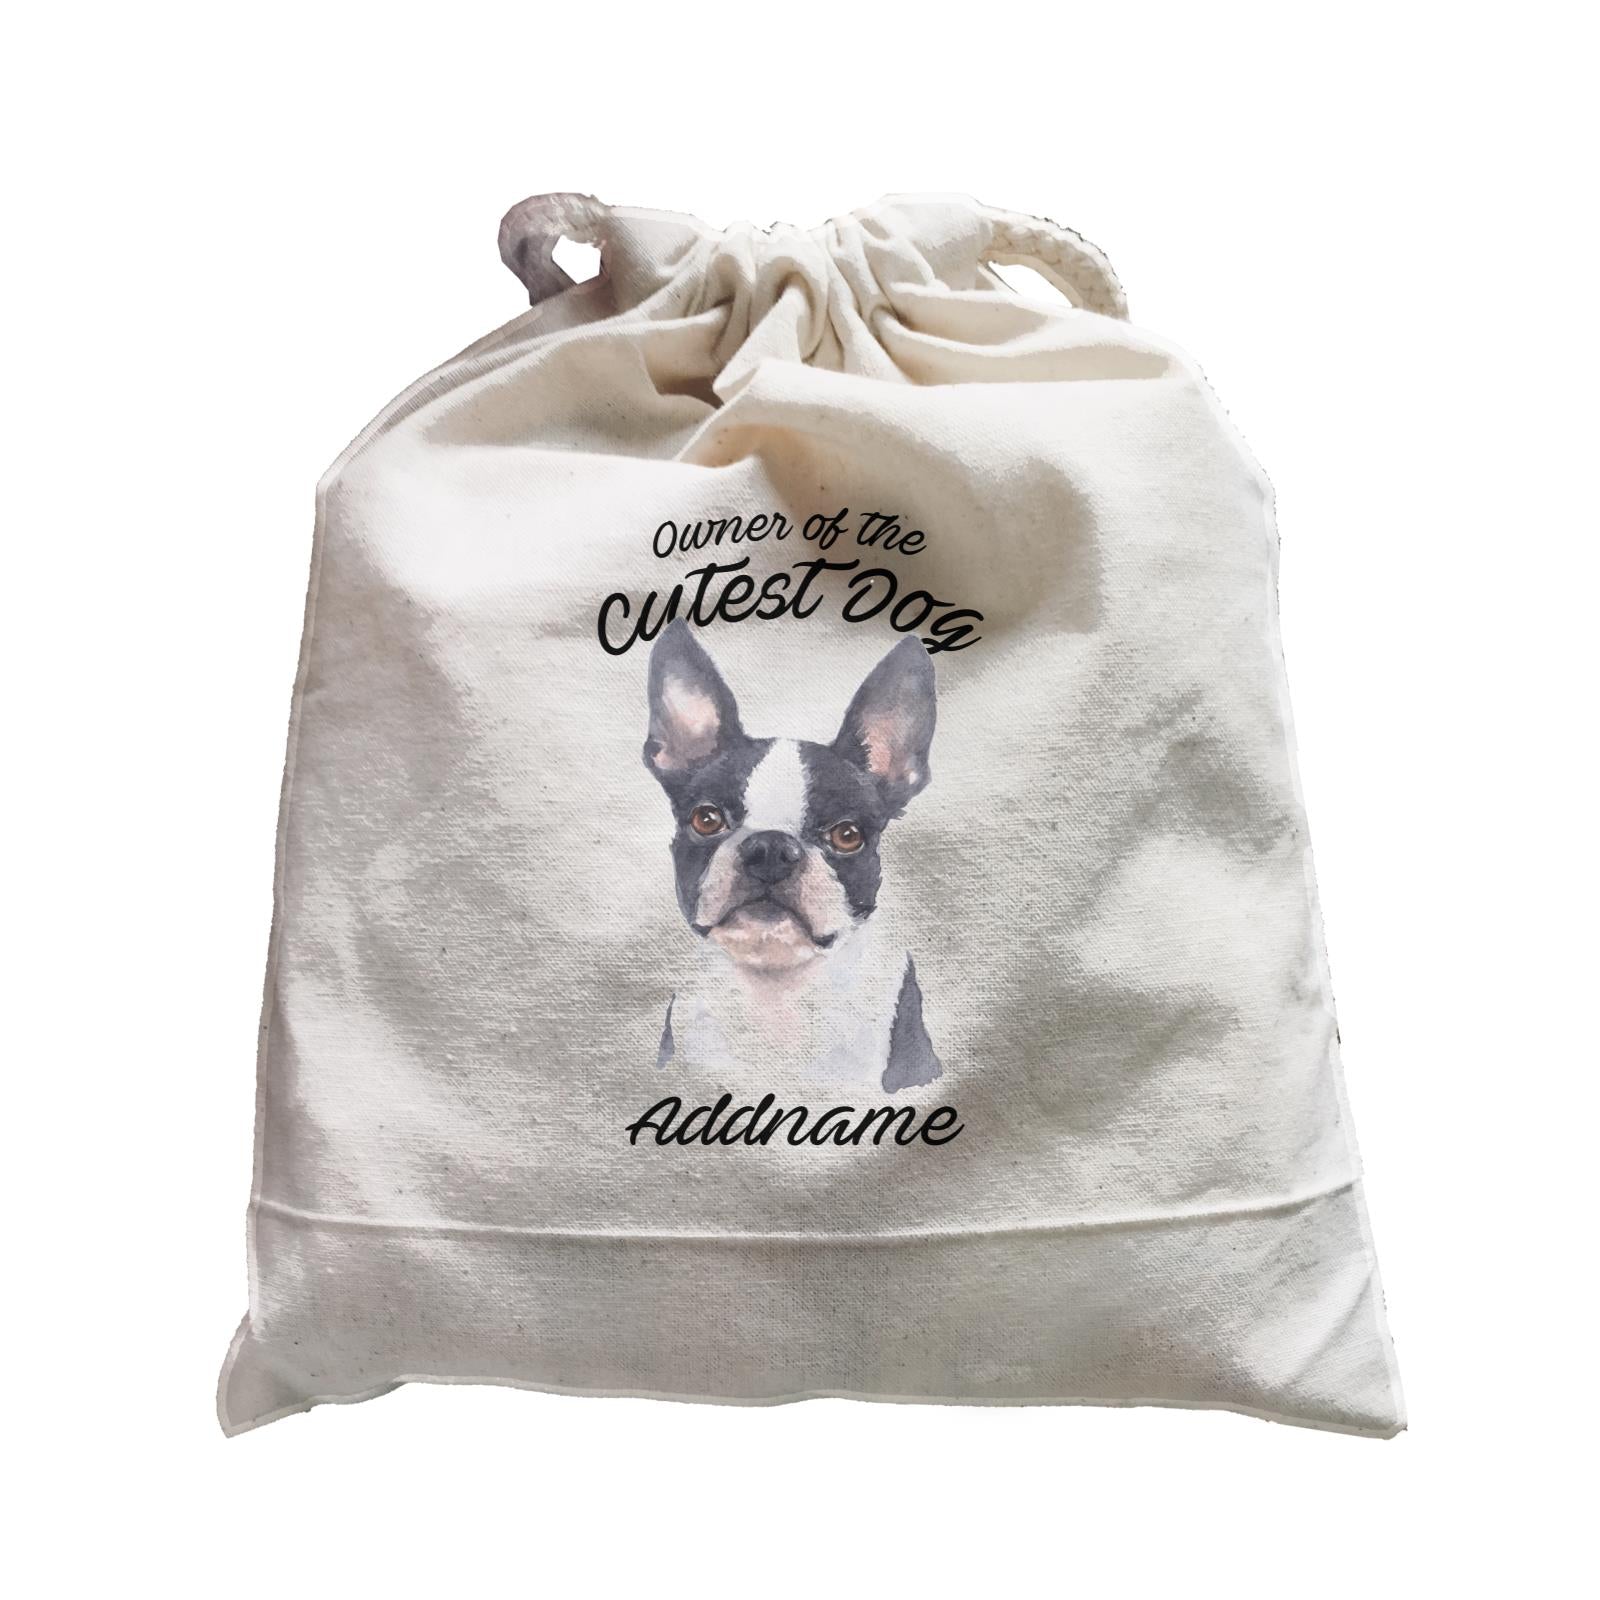 Watercolor Dog Owner Of The Cutest Dog Boston Terrier Addname Satchel